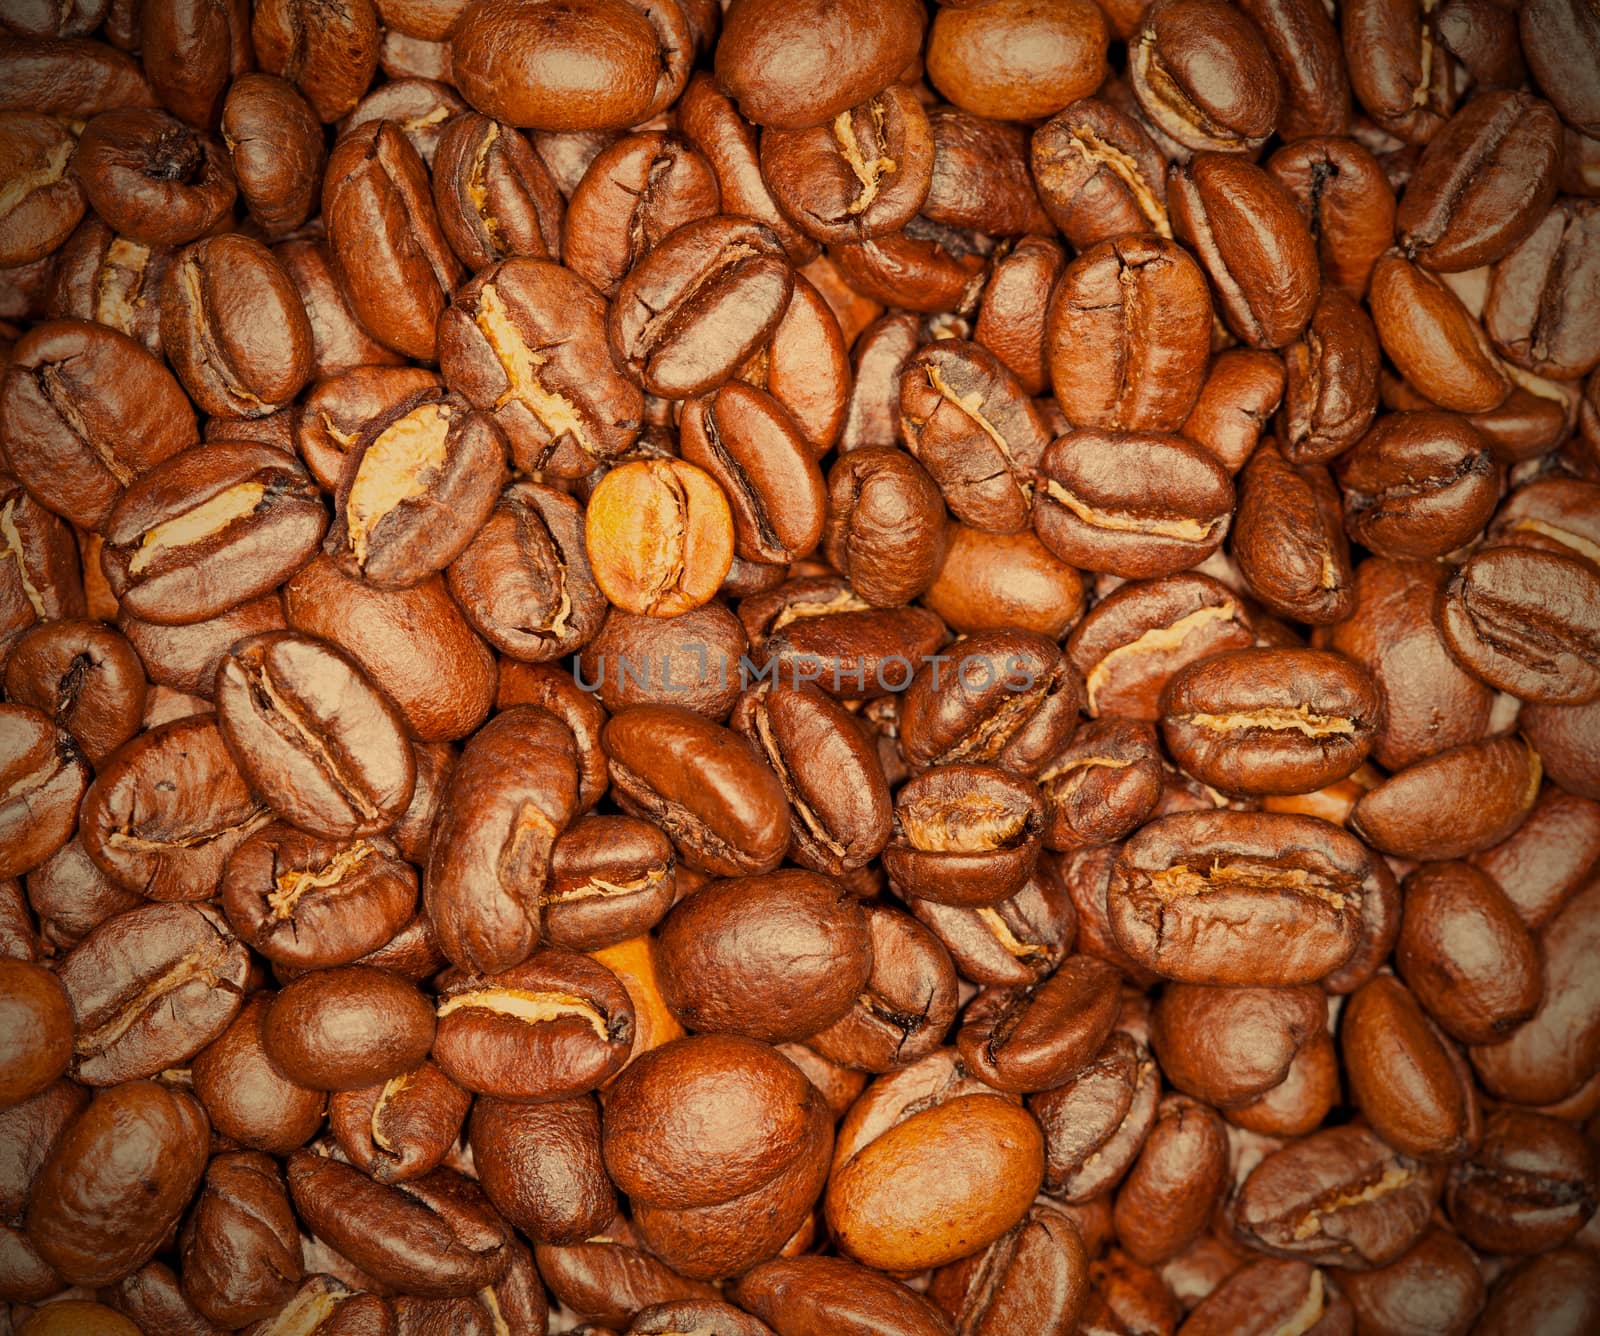 roasted coffee beans background, instagram image style